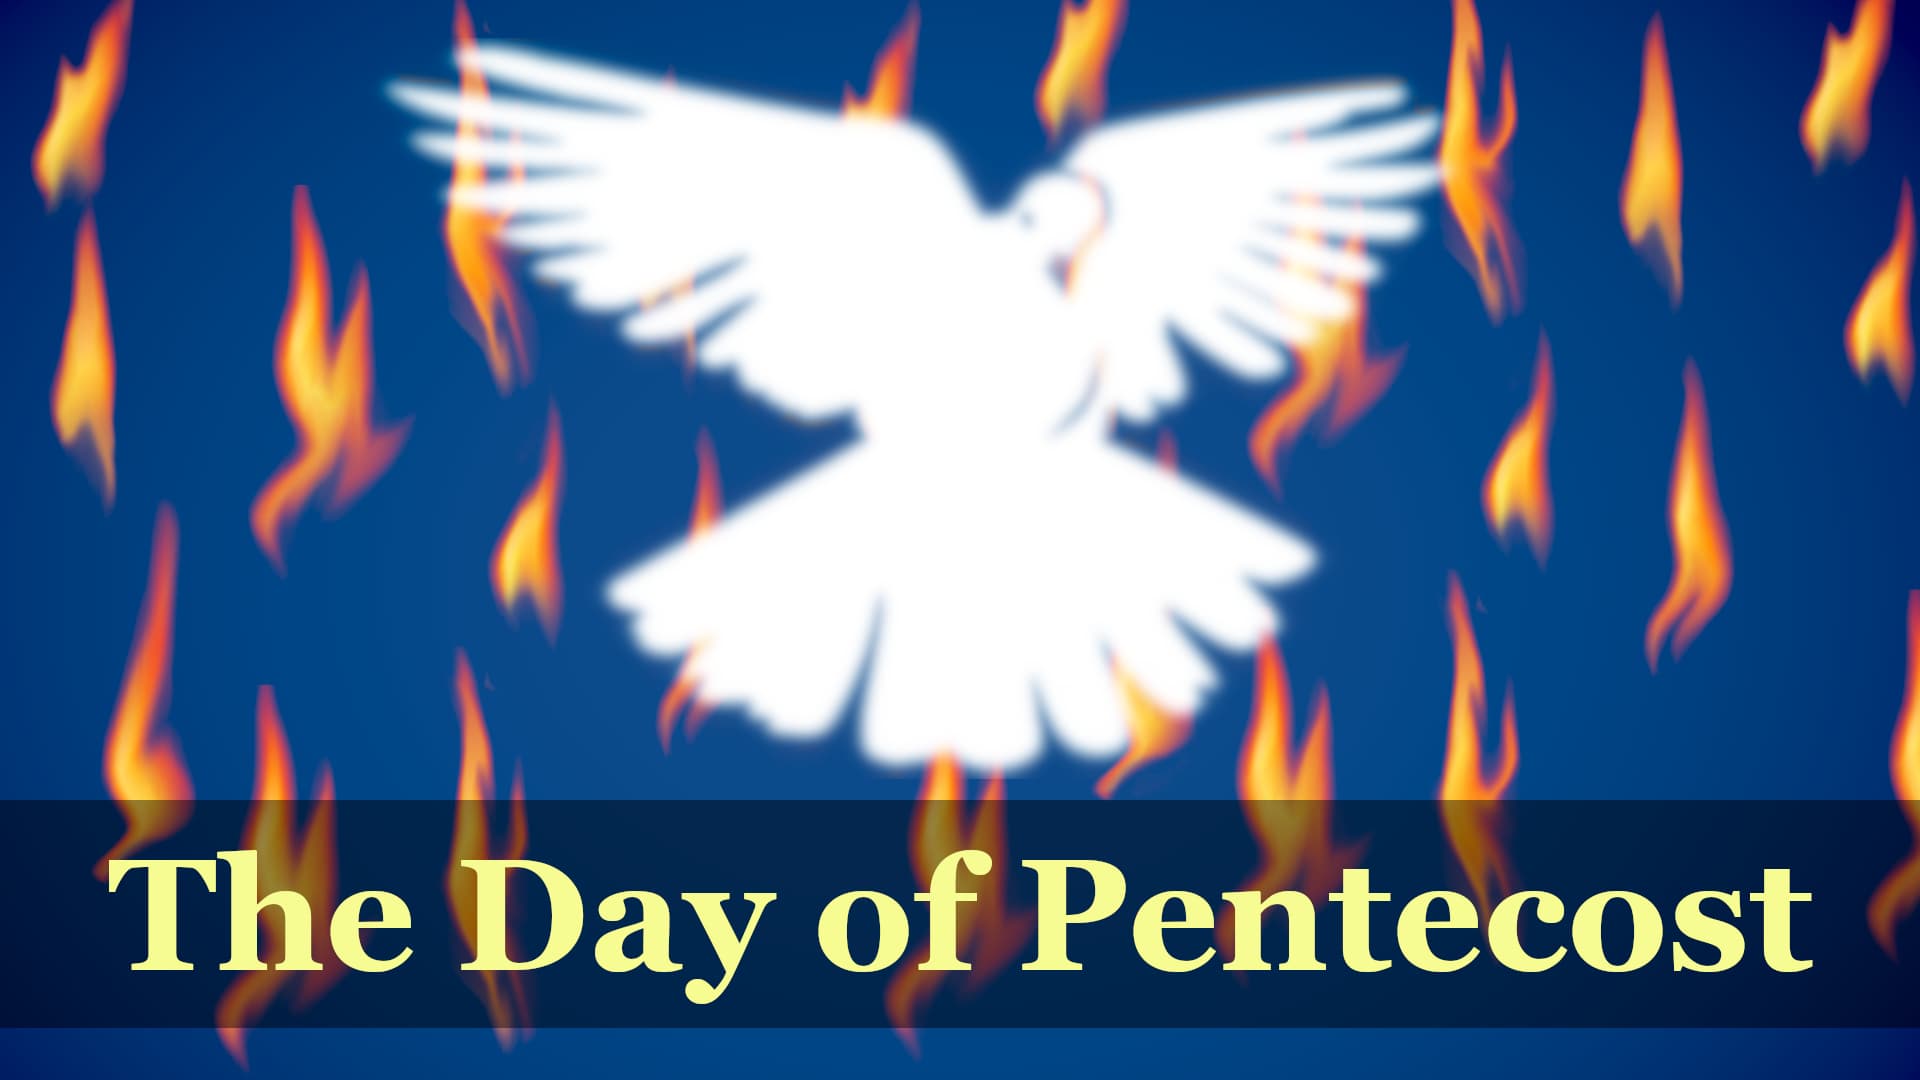 This Pentecost Sunday will include believer’s baptism. Preaching from